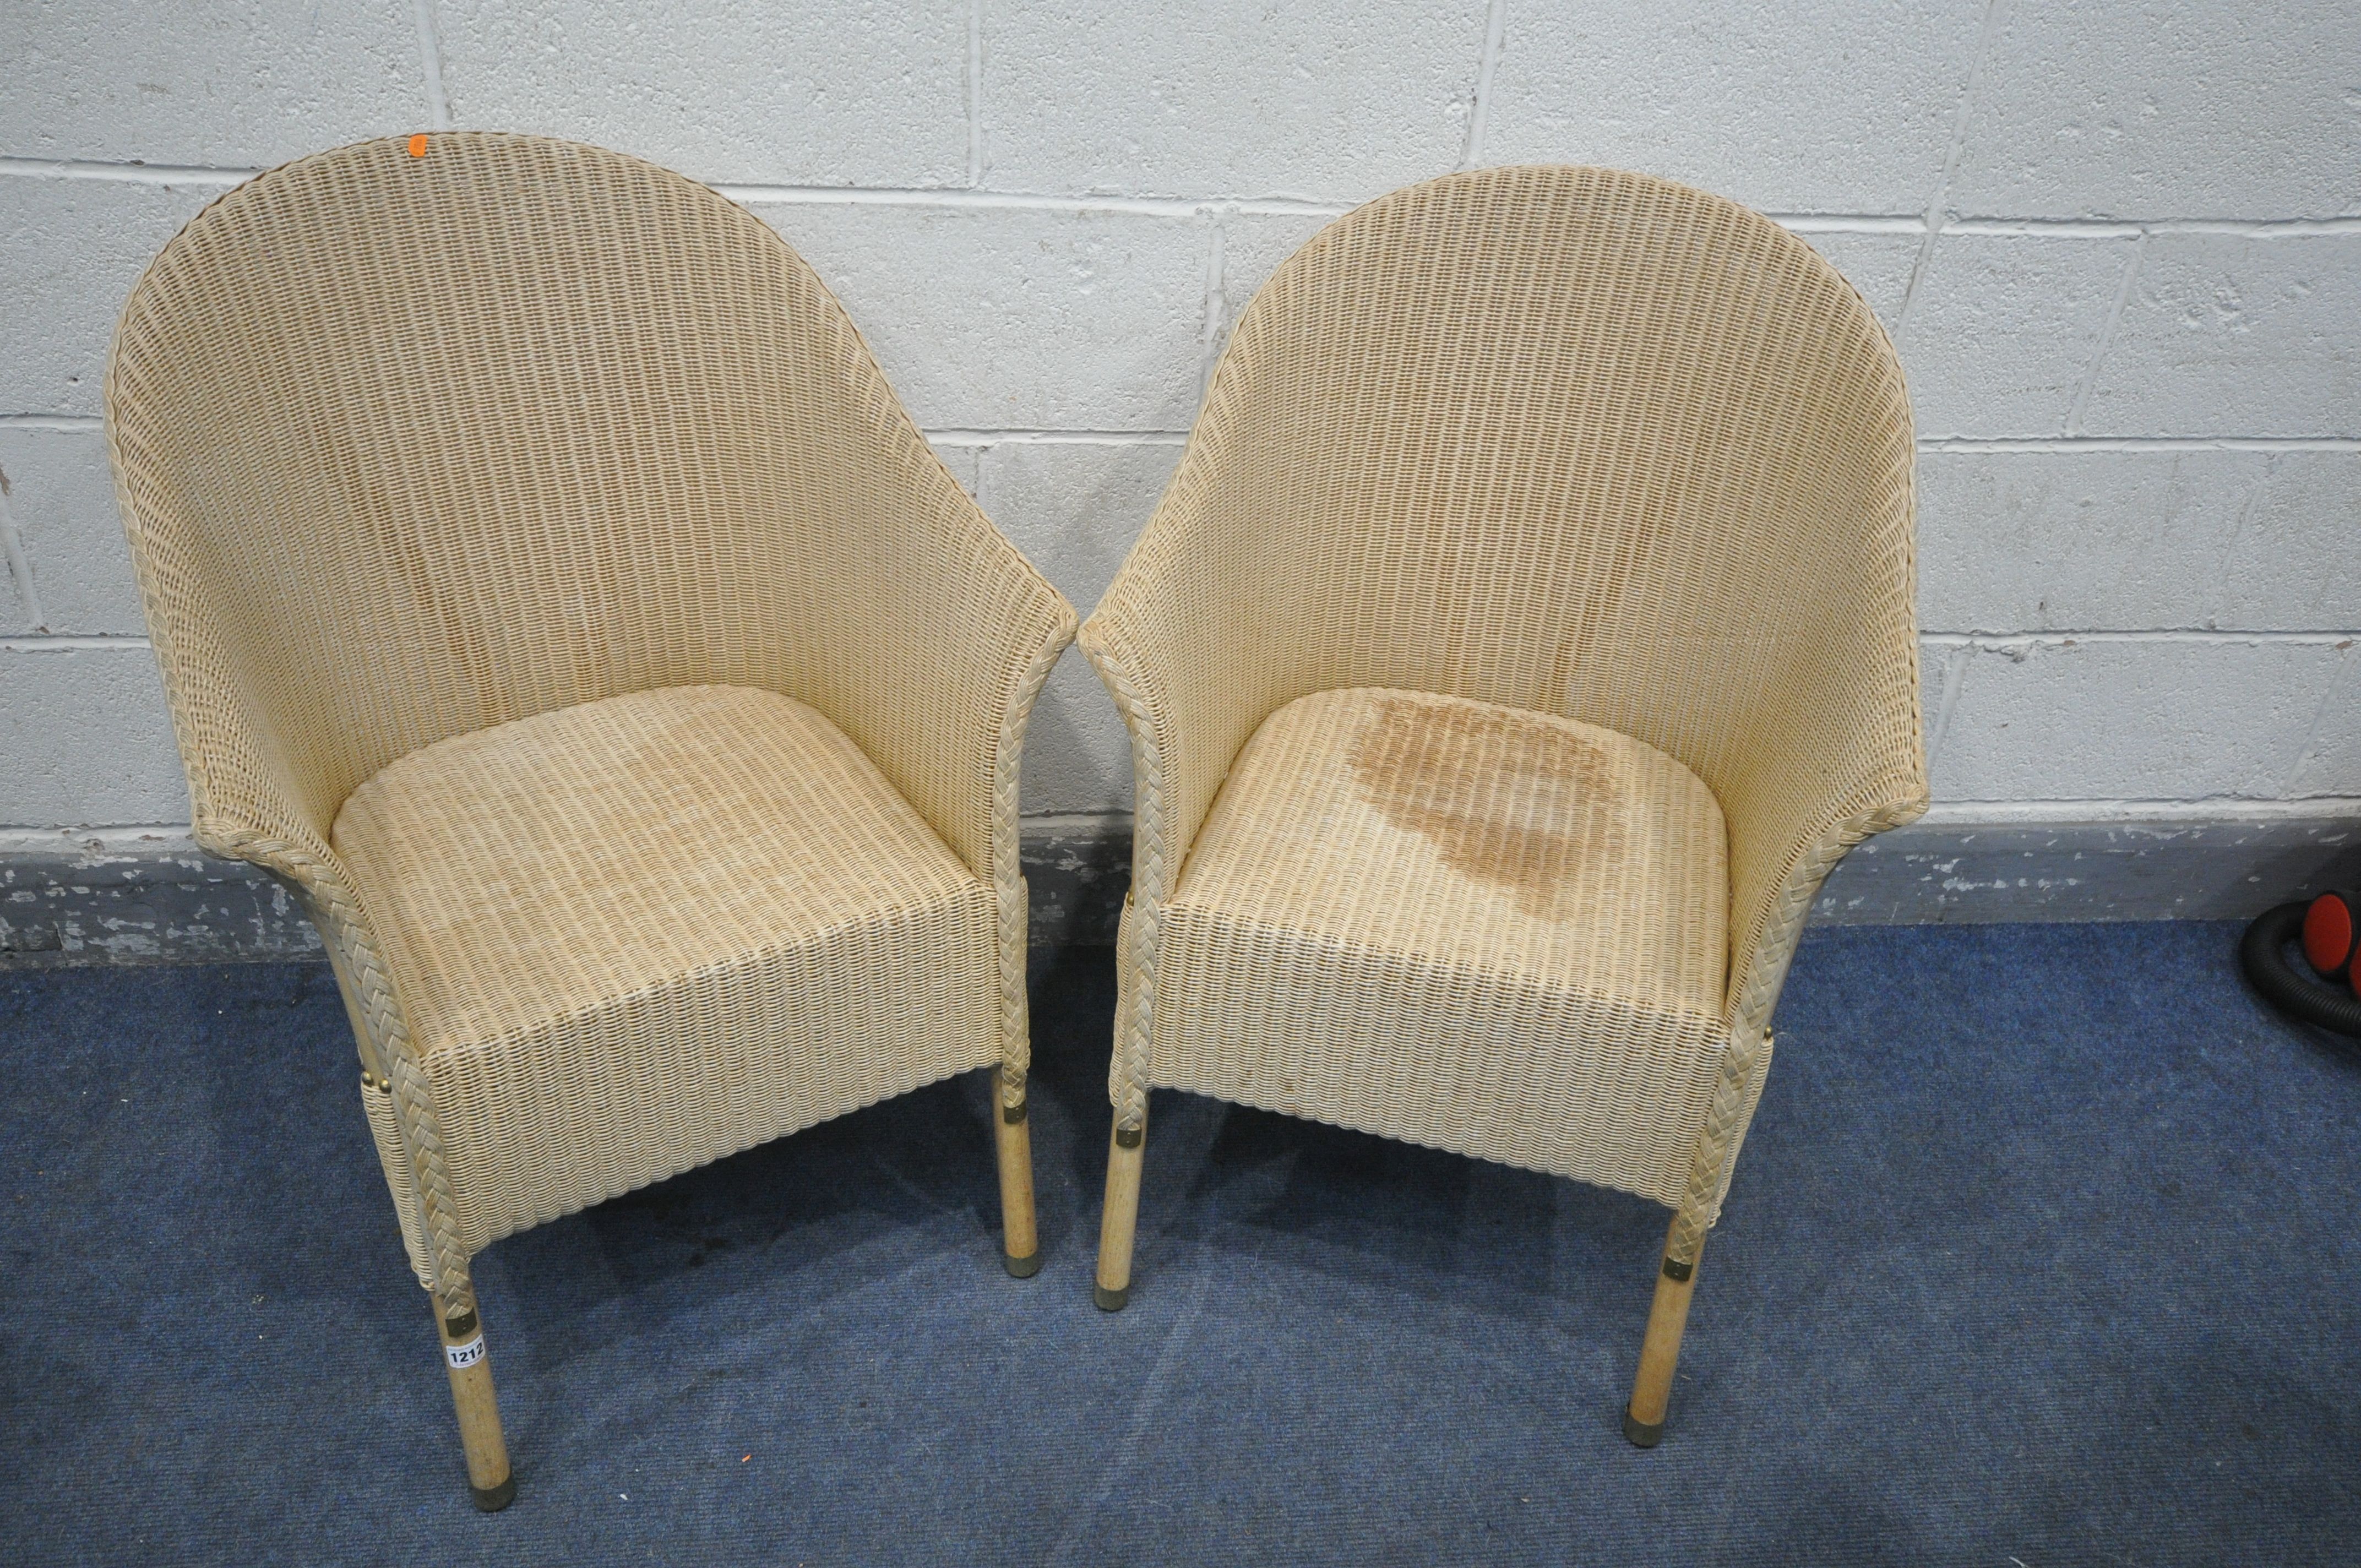 A PAIR OF CREAM PAINTED LLOYD LOOM TUB CHAIRS, condition - stain to one seat, other